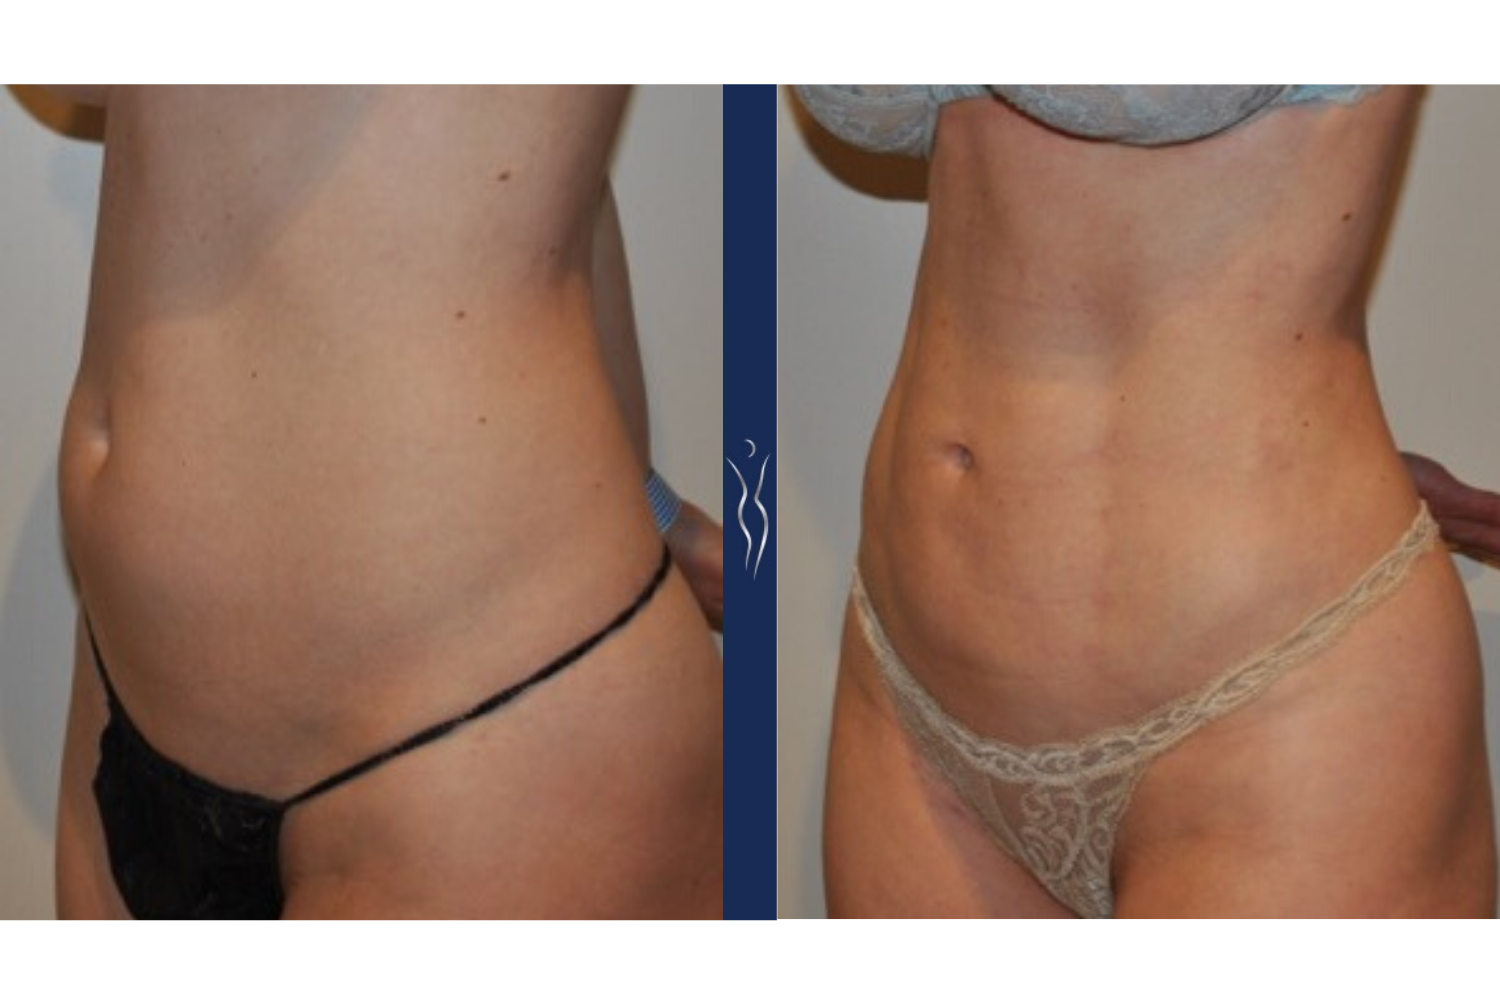 36 year old caucasian lady VASER liposuction and Renuvion left oblique